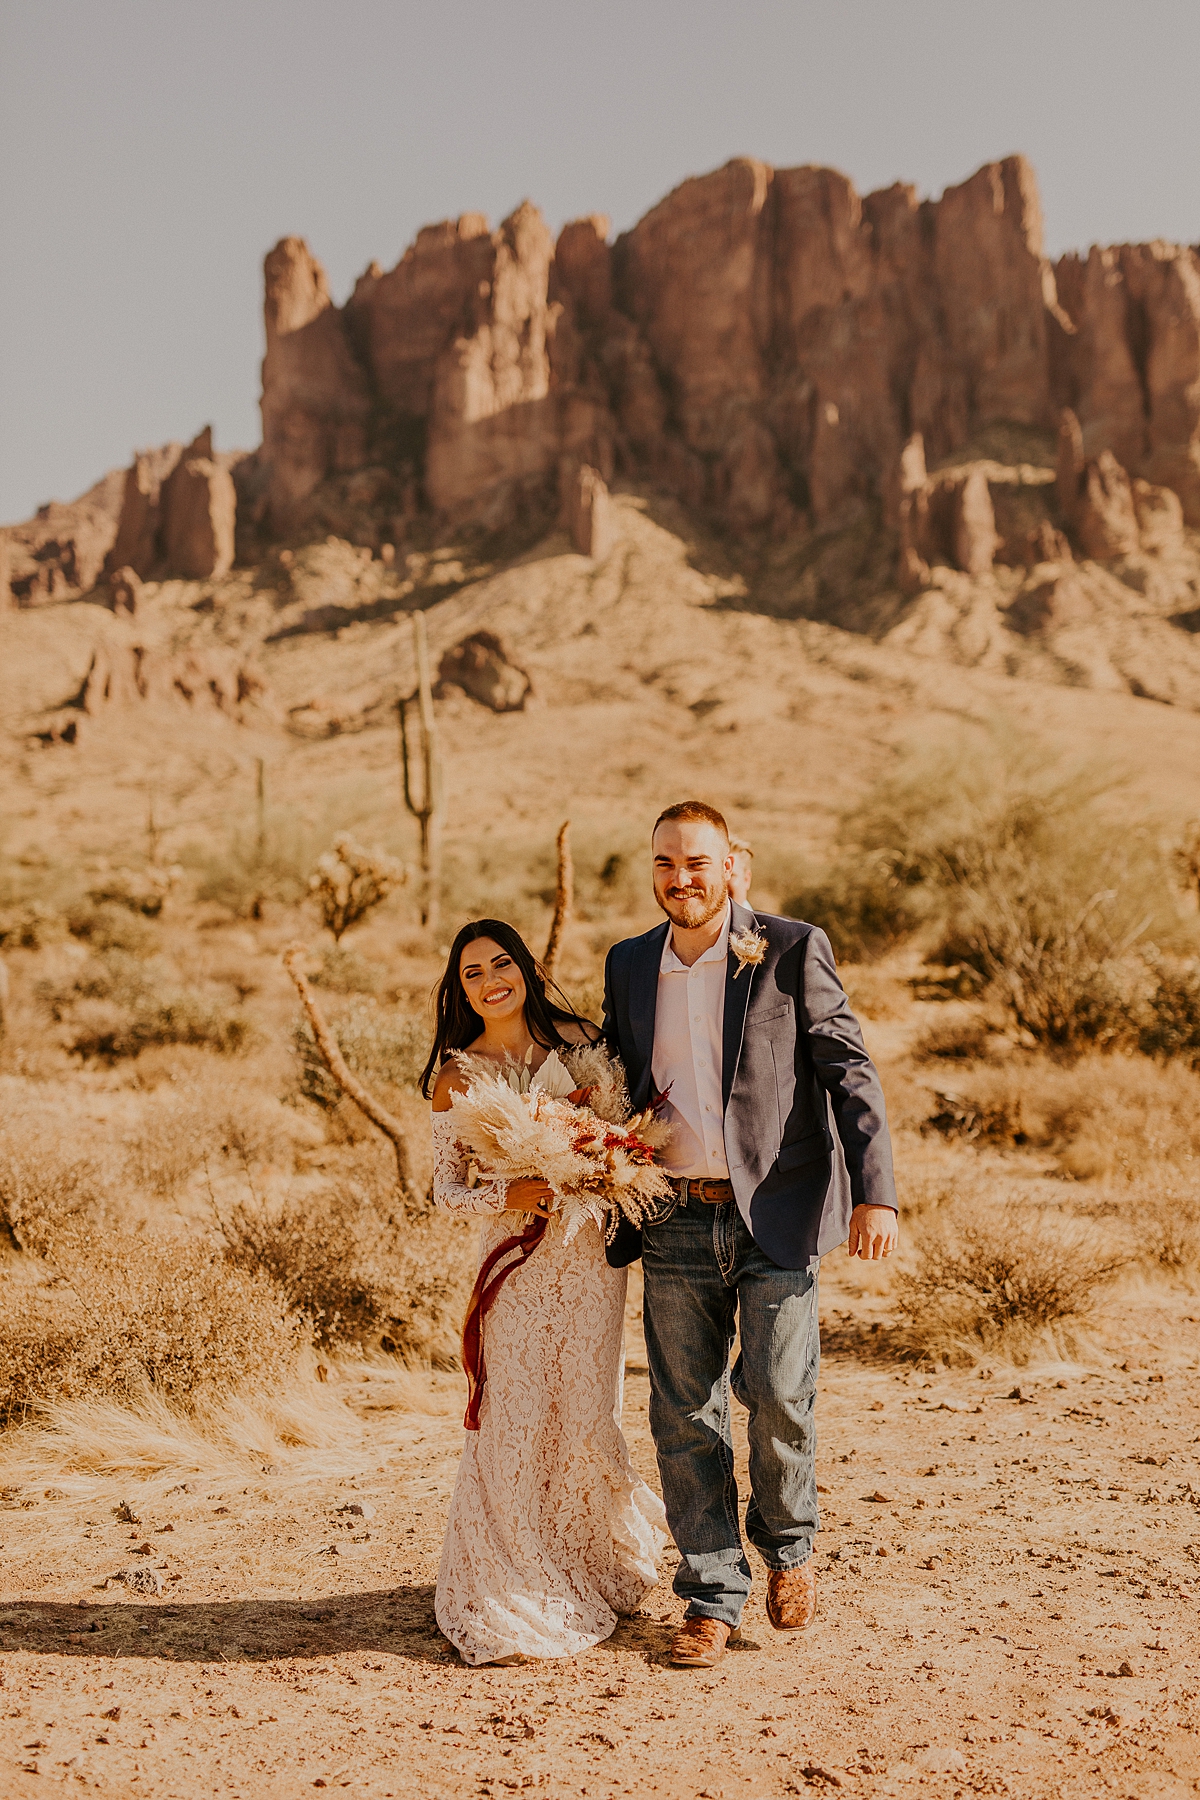 Intimate-elopement-in-superstition-mountain-wilderness-allison-slater-photography30.jpg